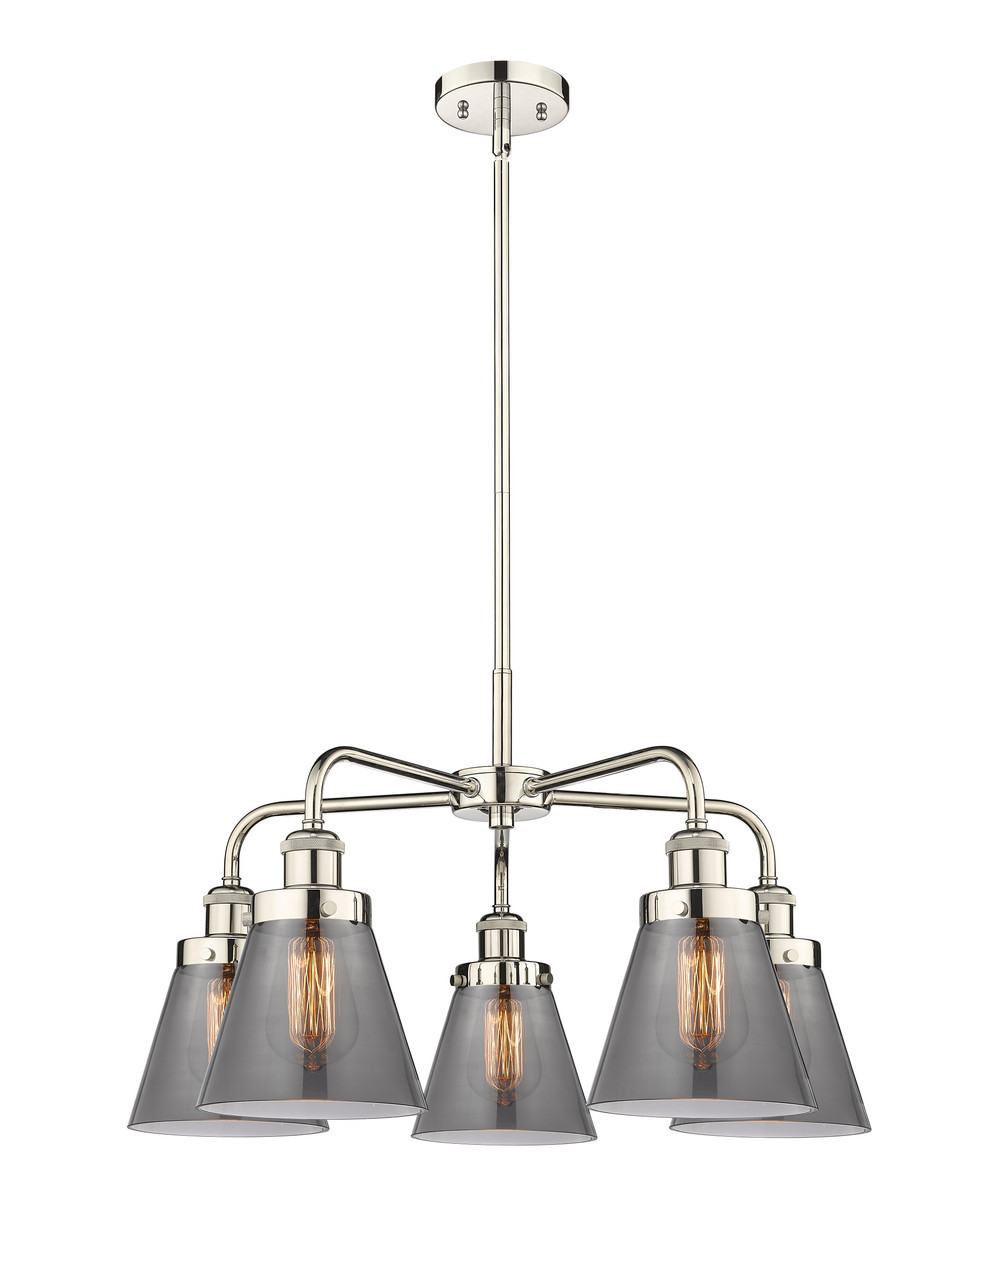 INNOVATIONS 916-5CR-PN-G63 Cone 5 24.25 inch Chandelier Polished Nickel